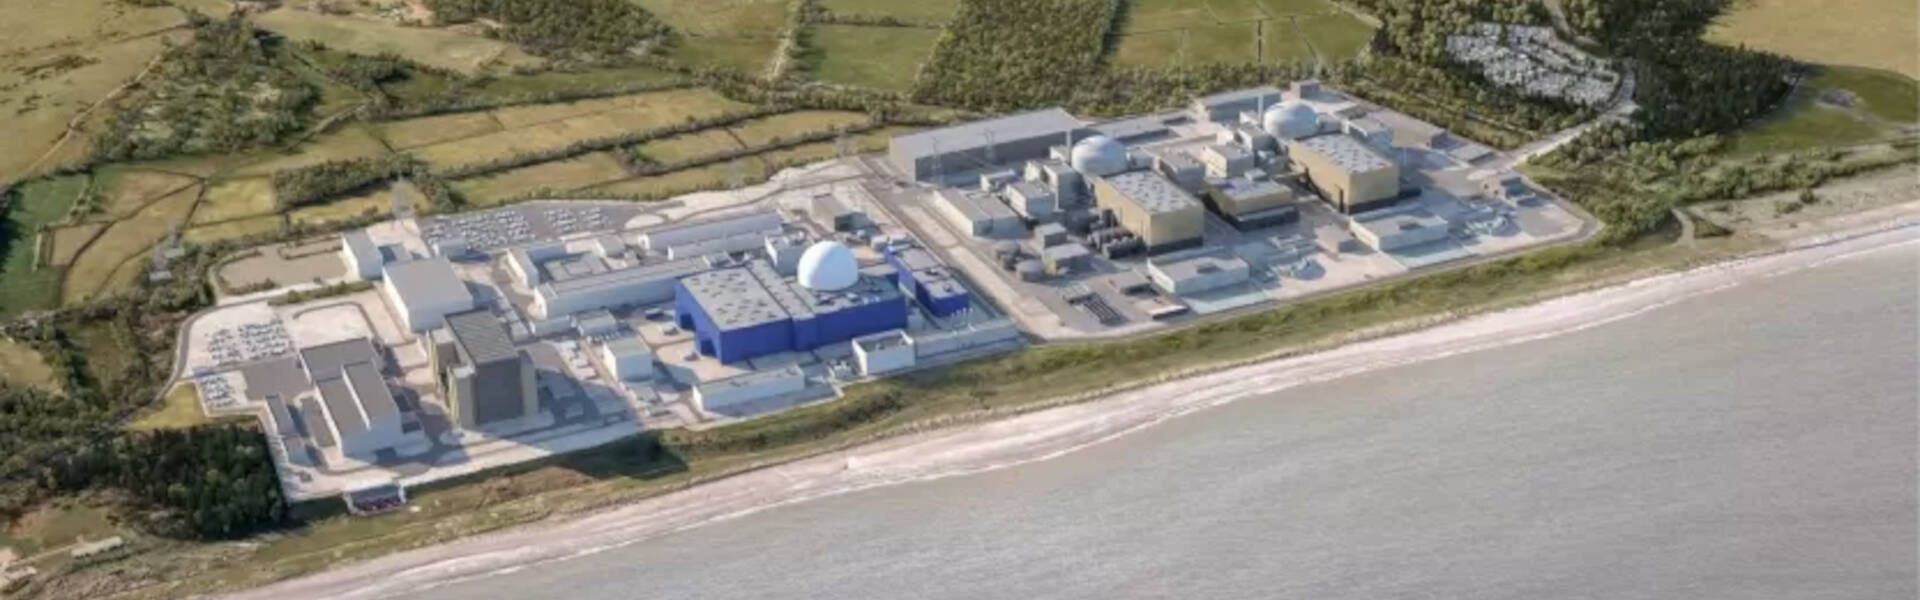 Kwarteng gives go-ahead to Sizewell C